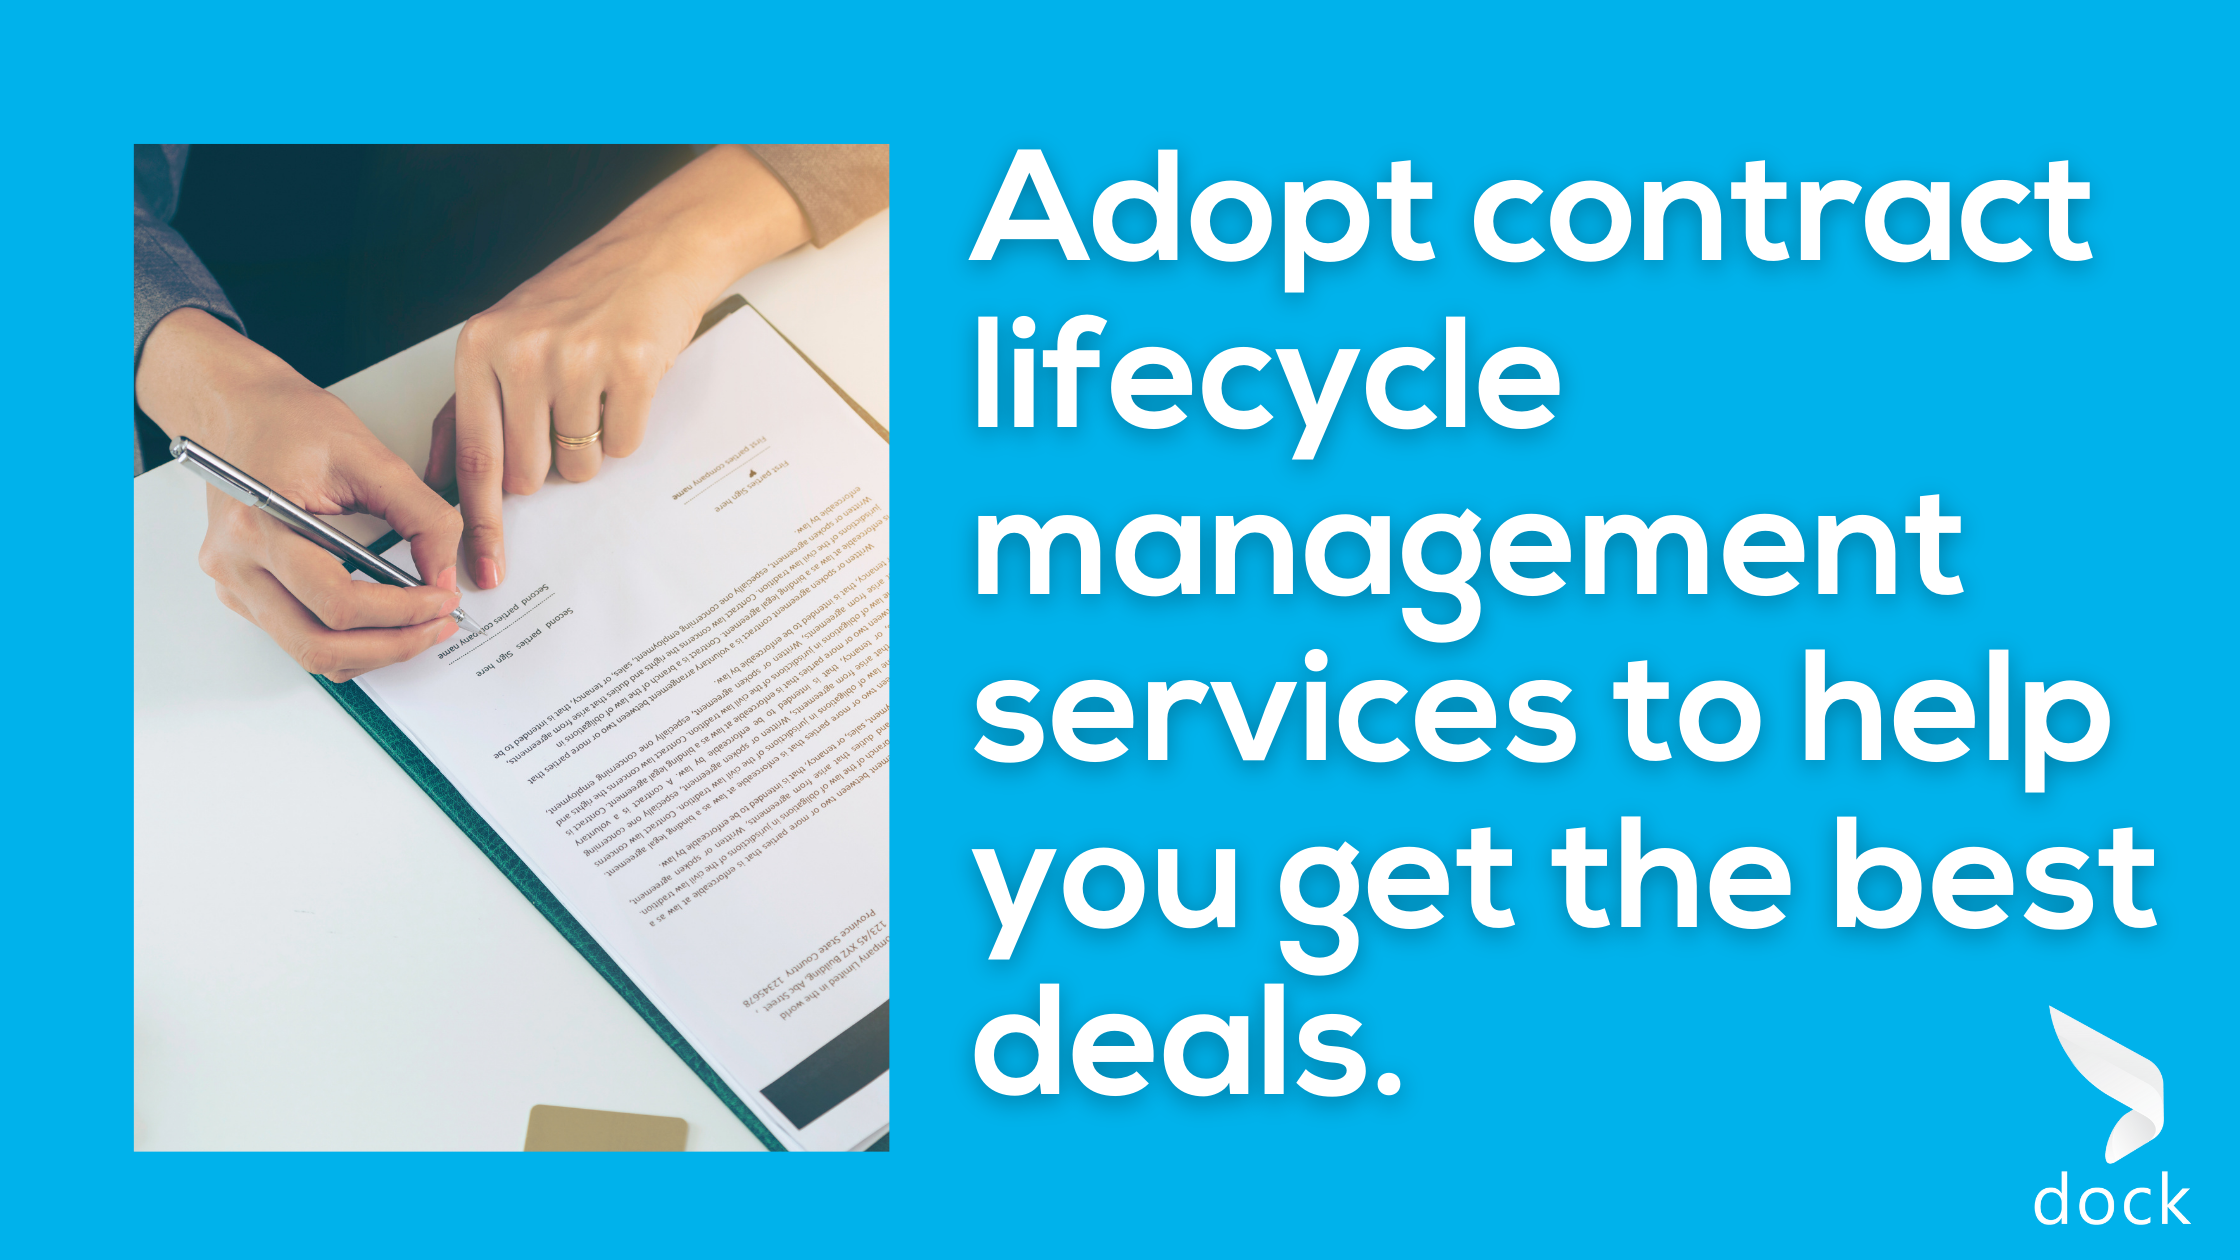 Contract Lifecycle Management Services can do great things, know more with Dock 365